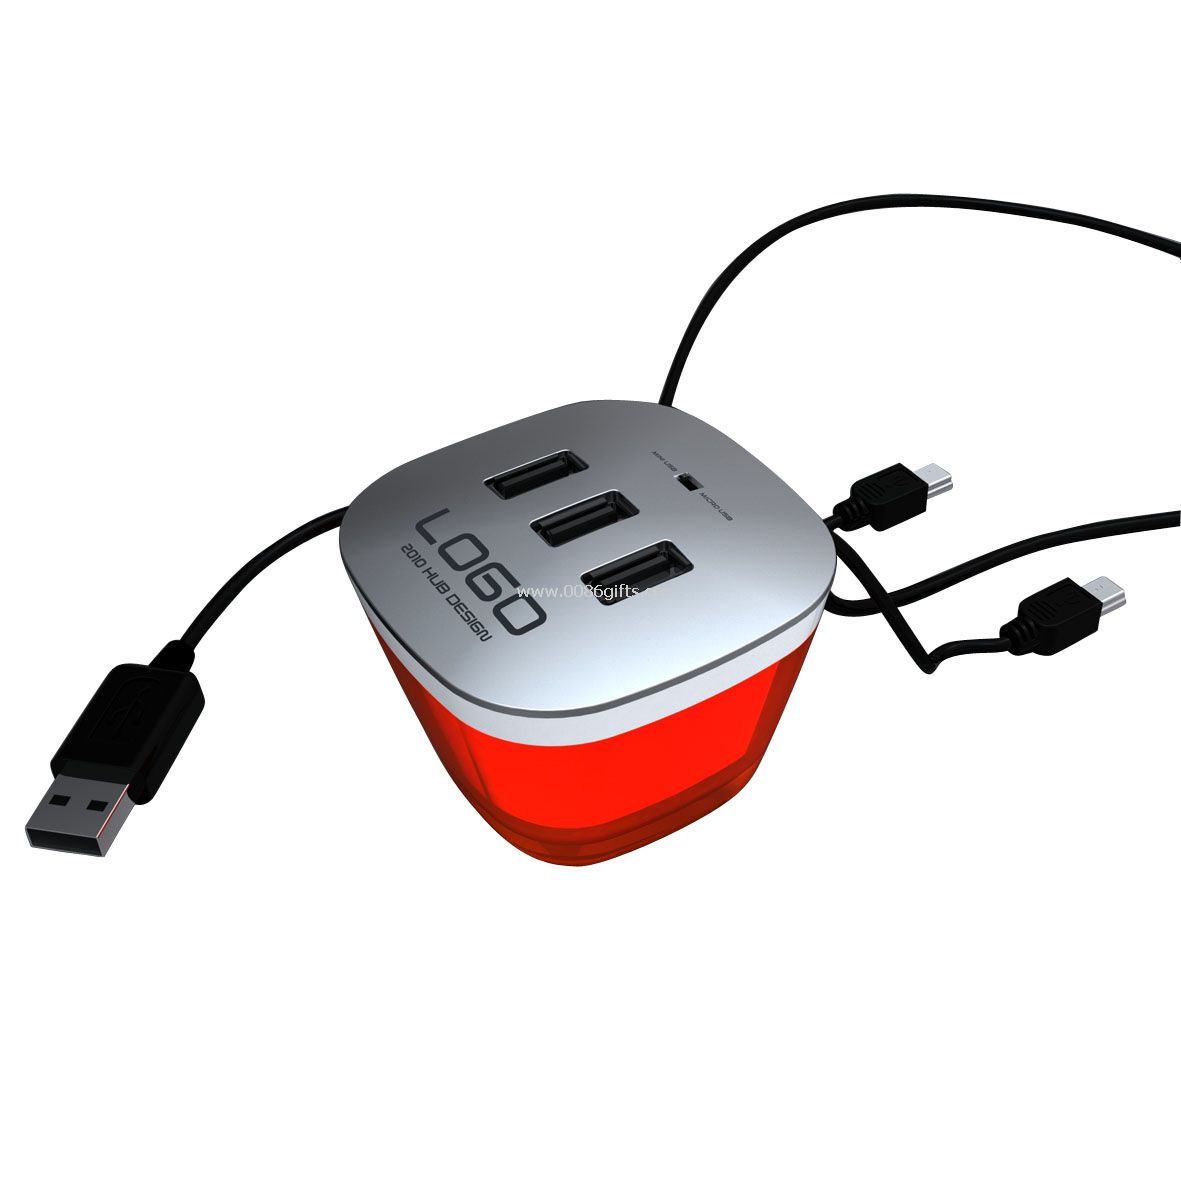 USB hub with mobile phone charger